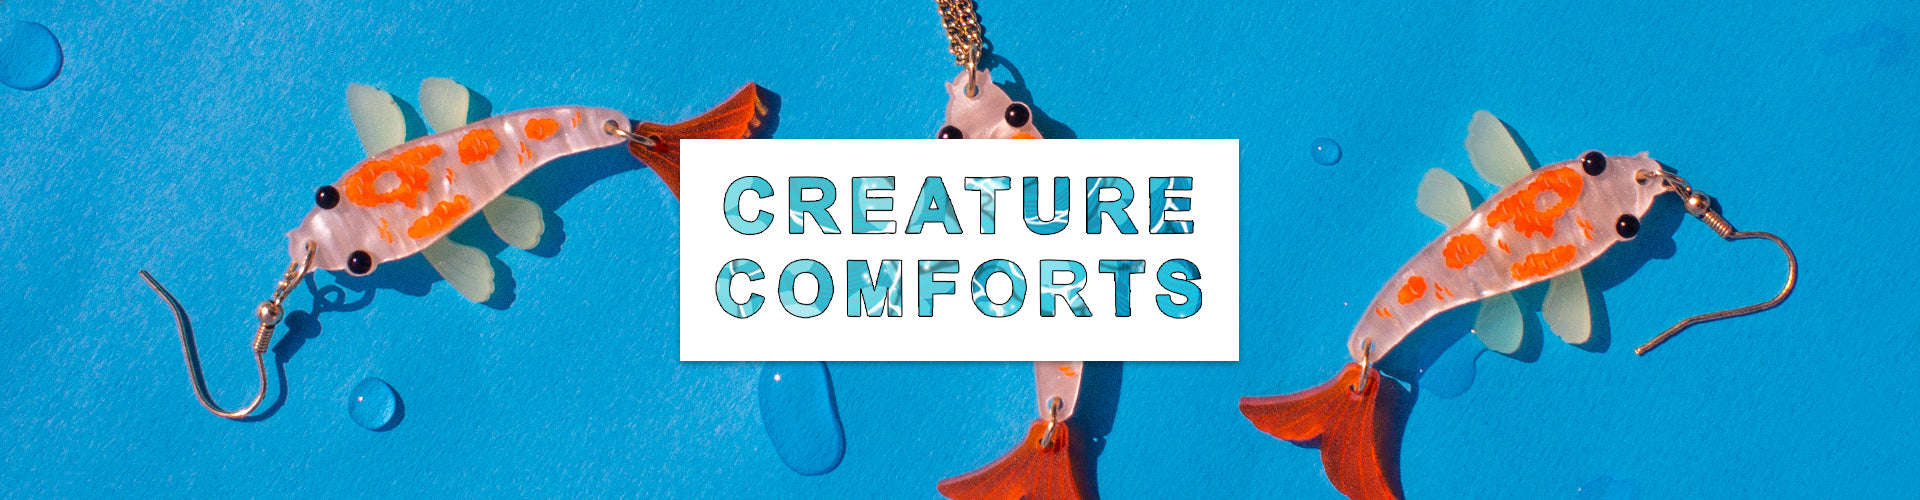 Creature Comforts to enjoy at home